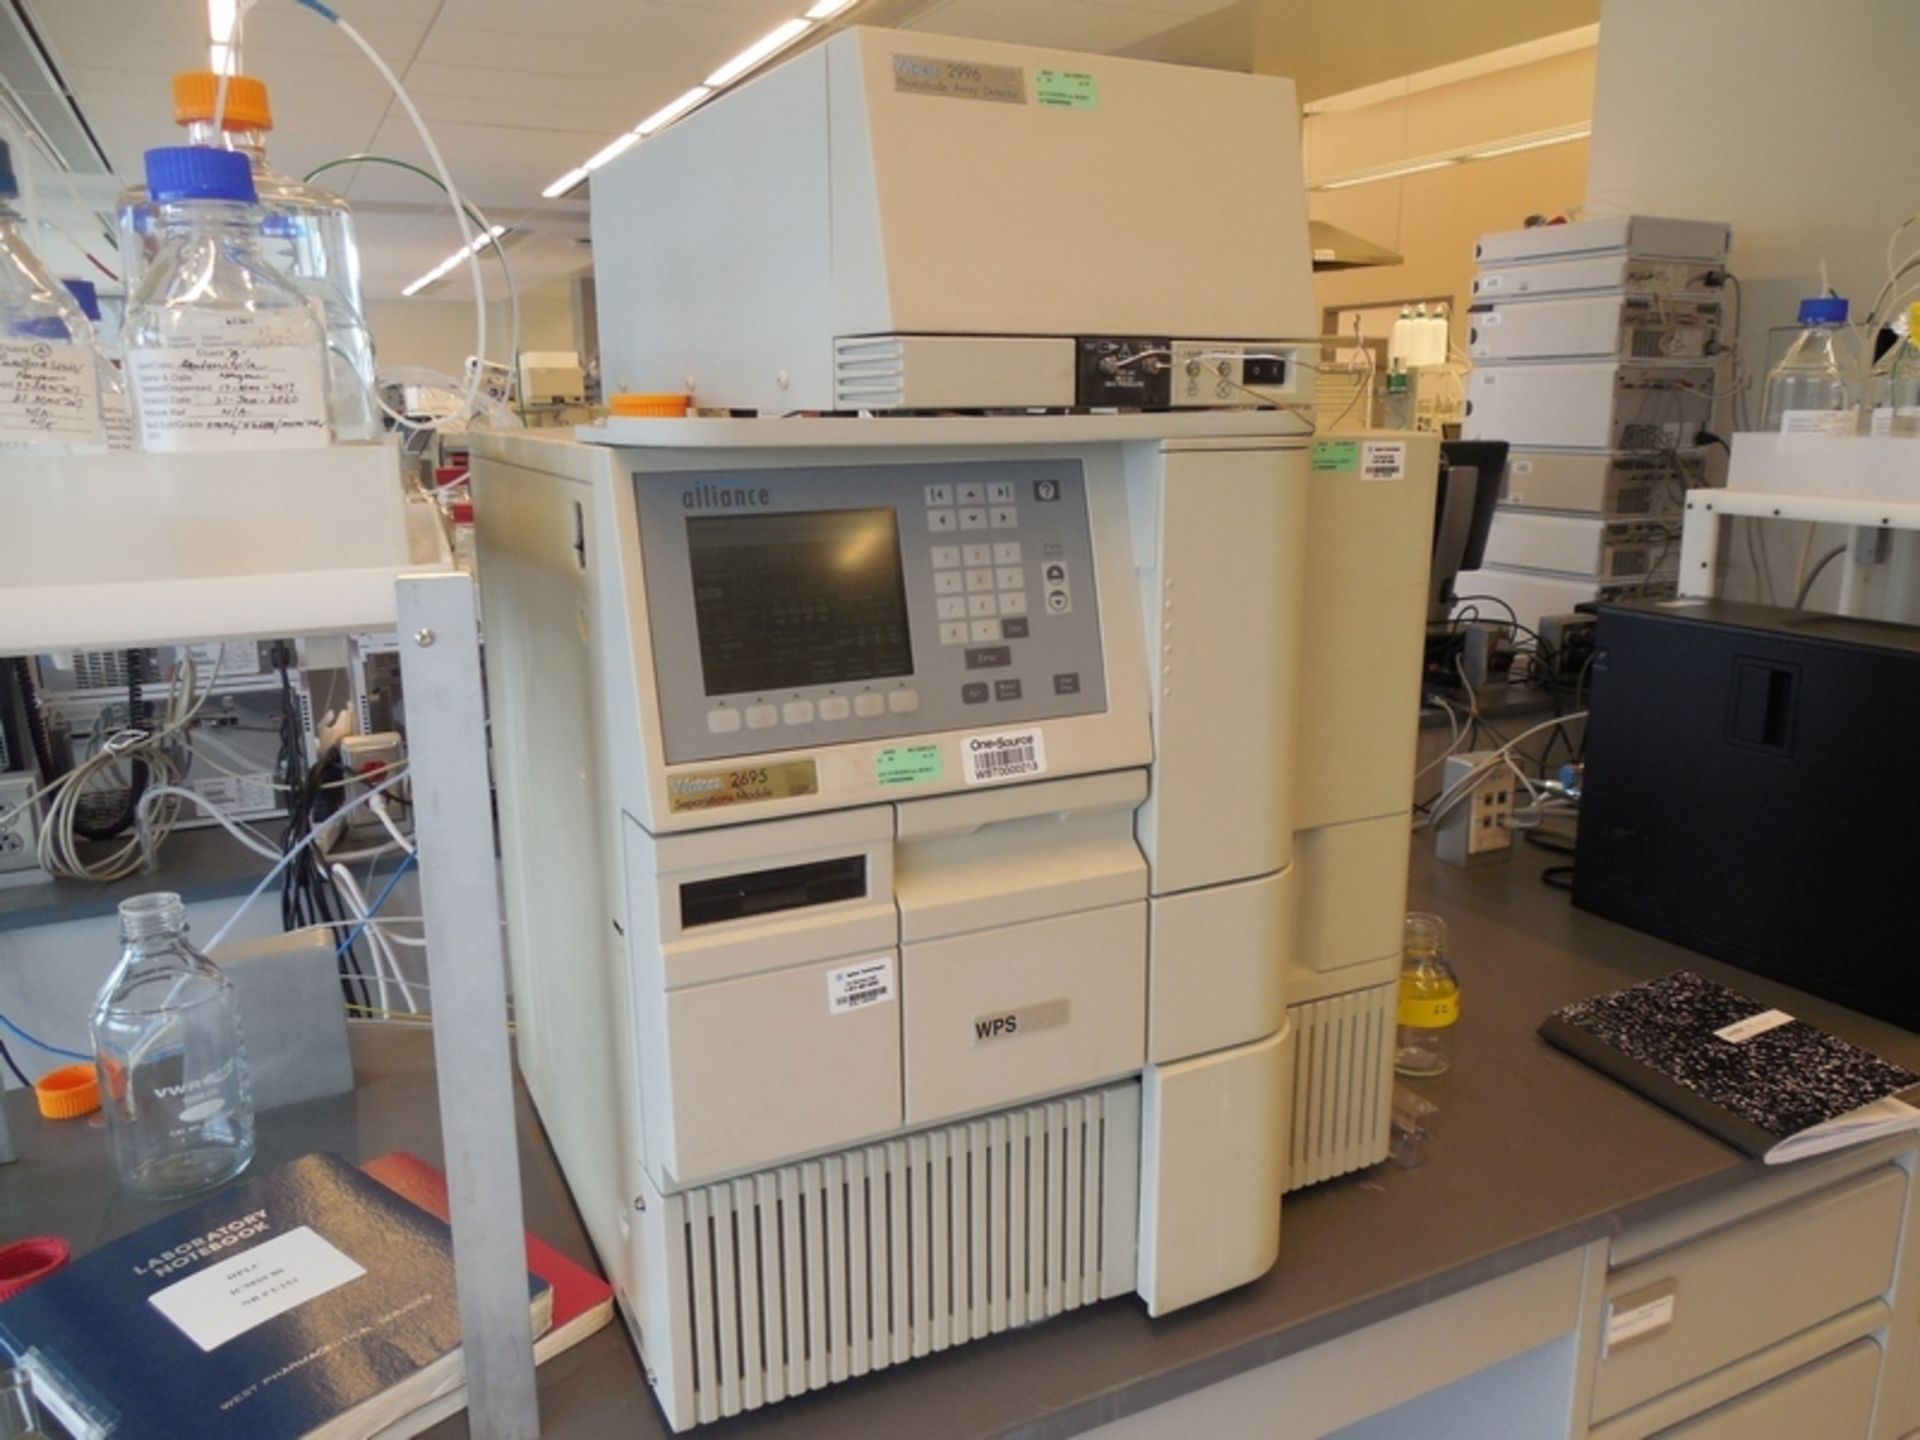 Waters Model 2695 Separations Module HPLC (High Performance Liquid Chromatograph) with Waters - Image 2 of 2